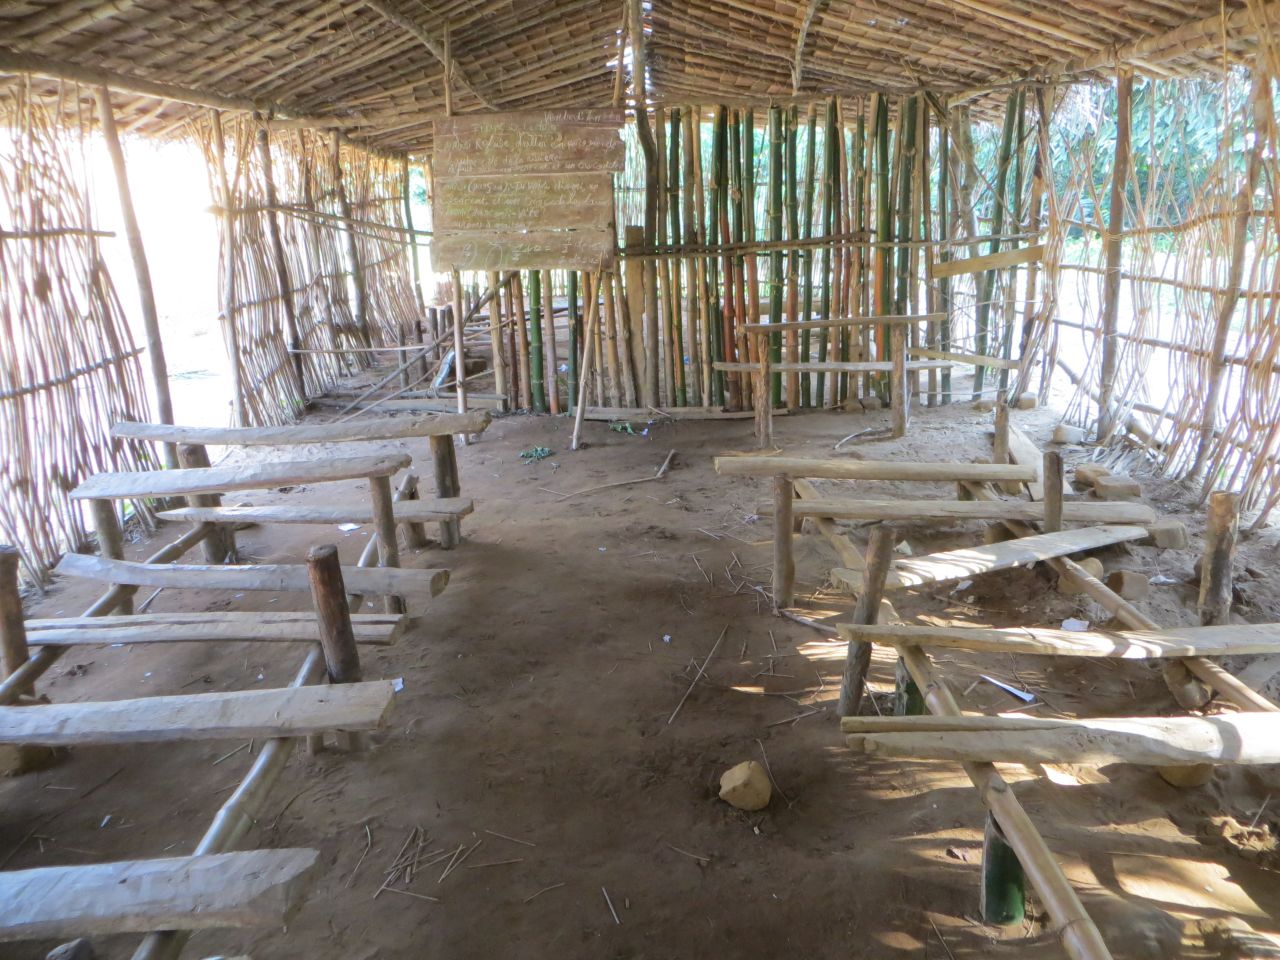 The primary school that previously existed in the area was in poor condition. 